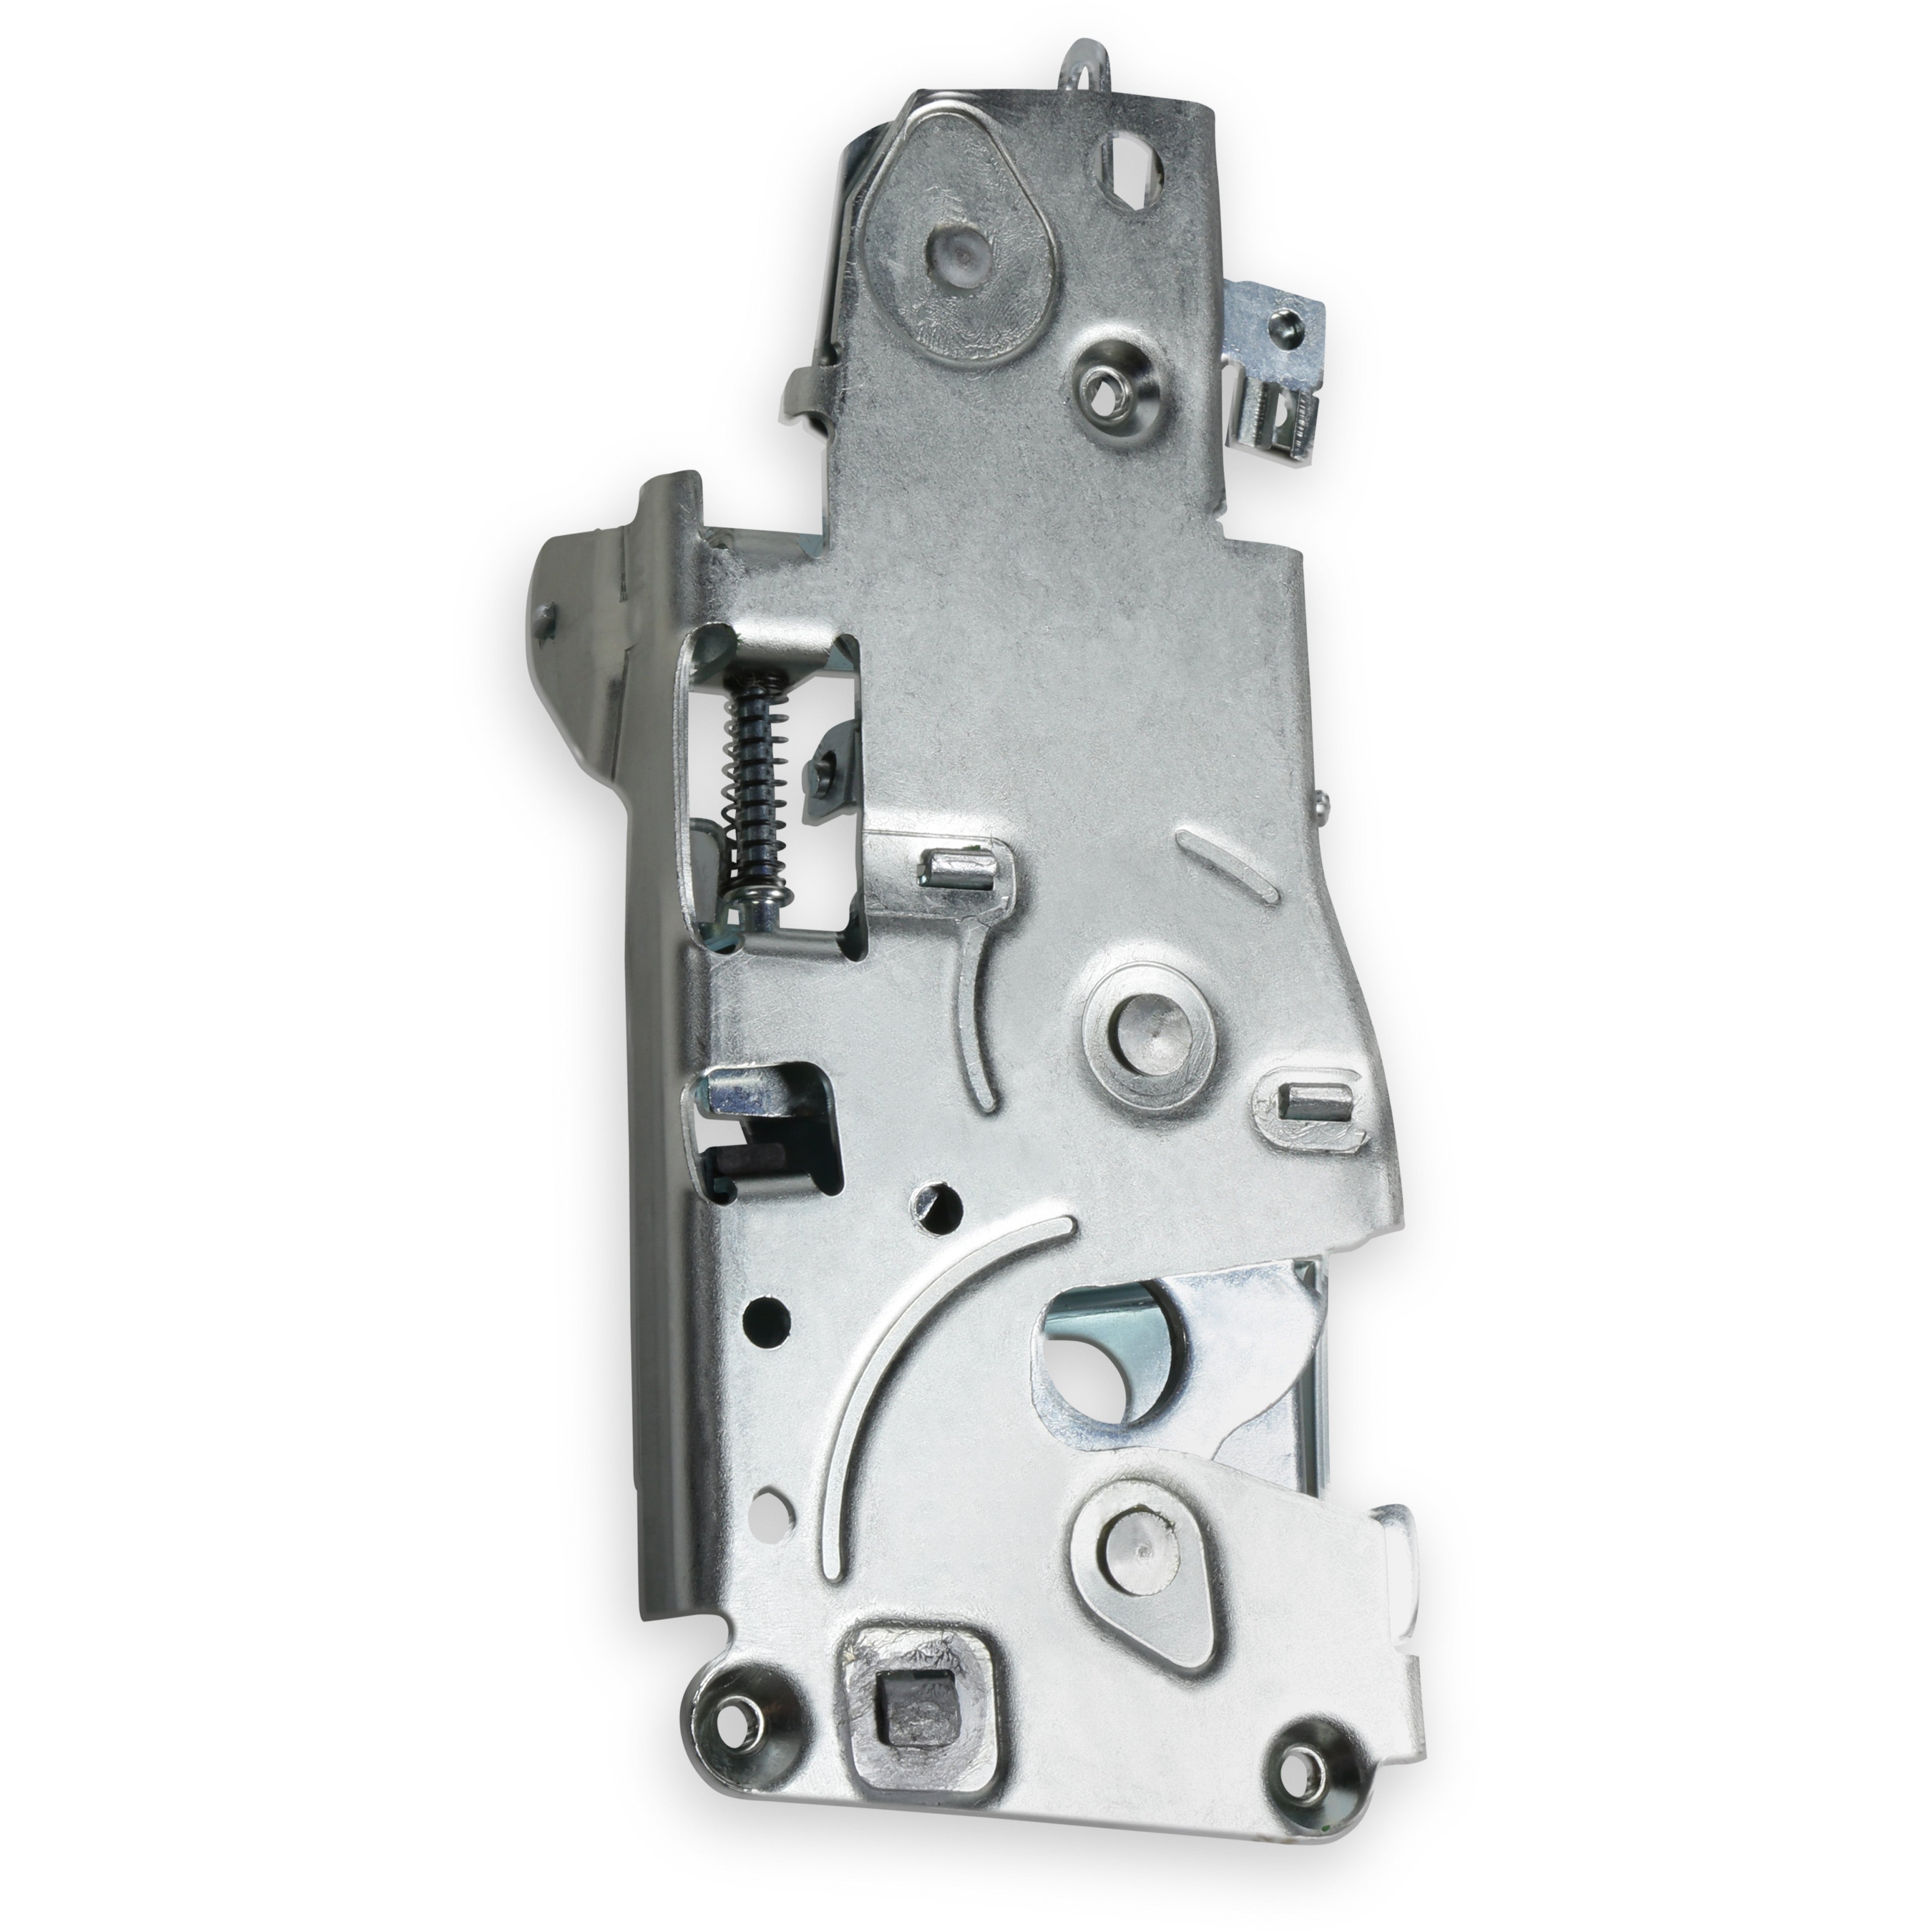 BROTHERS C/K Front Door Latch Assembly - LH pn 04-225